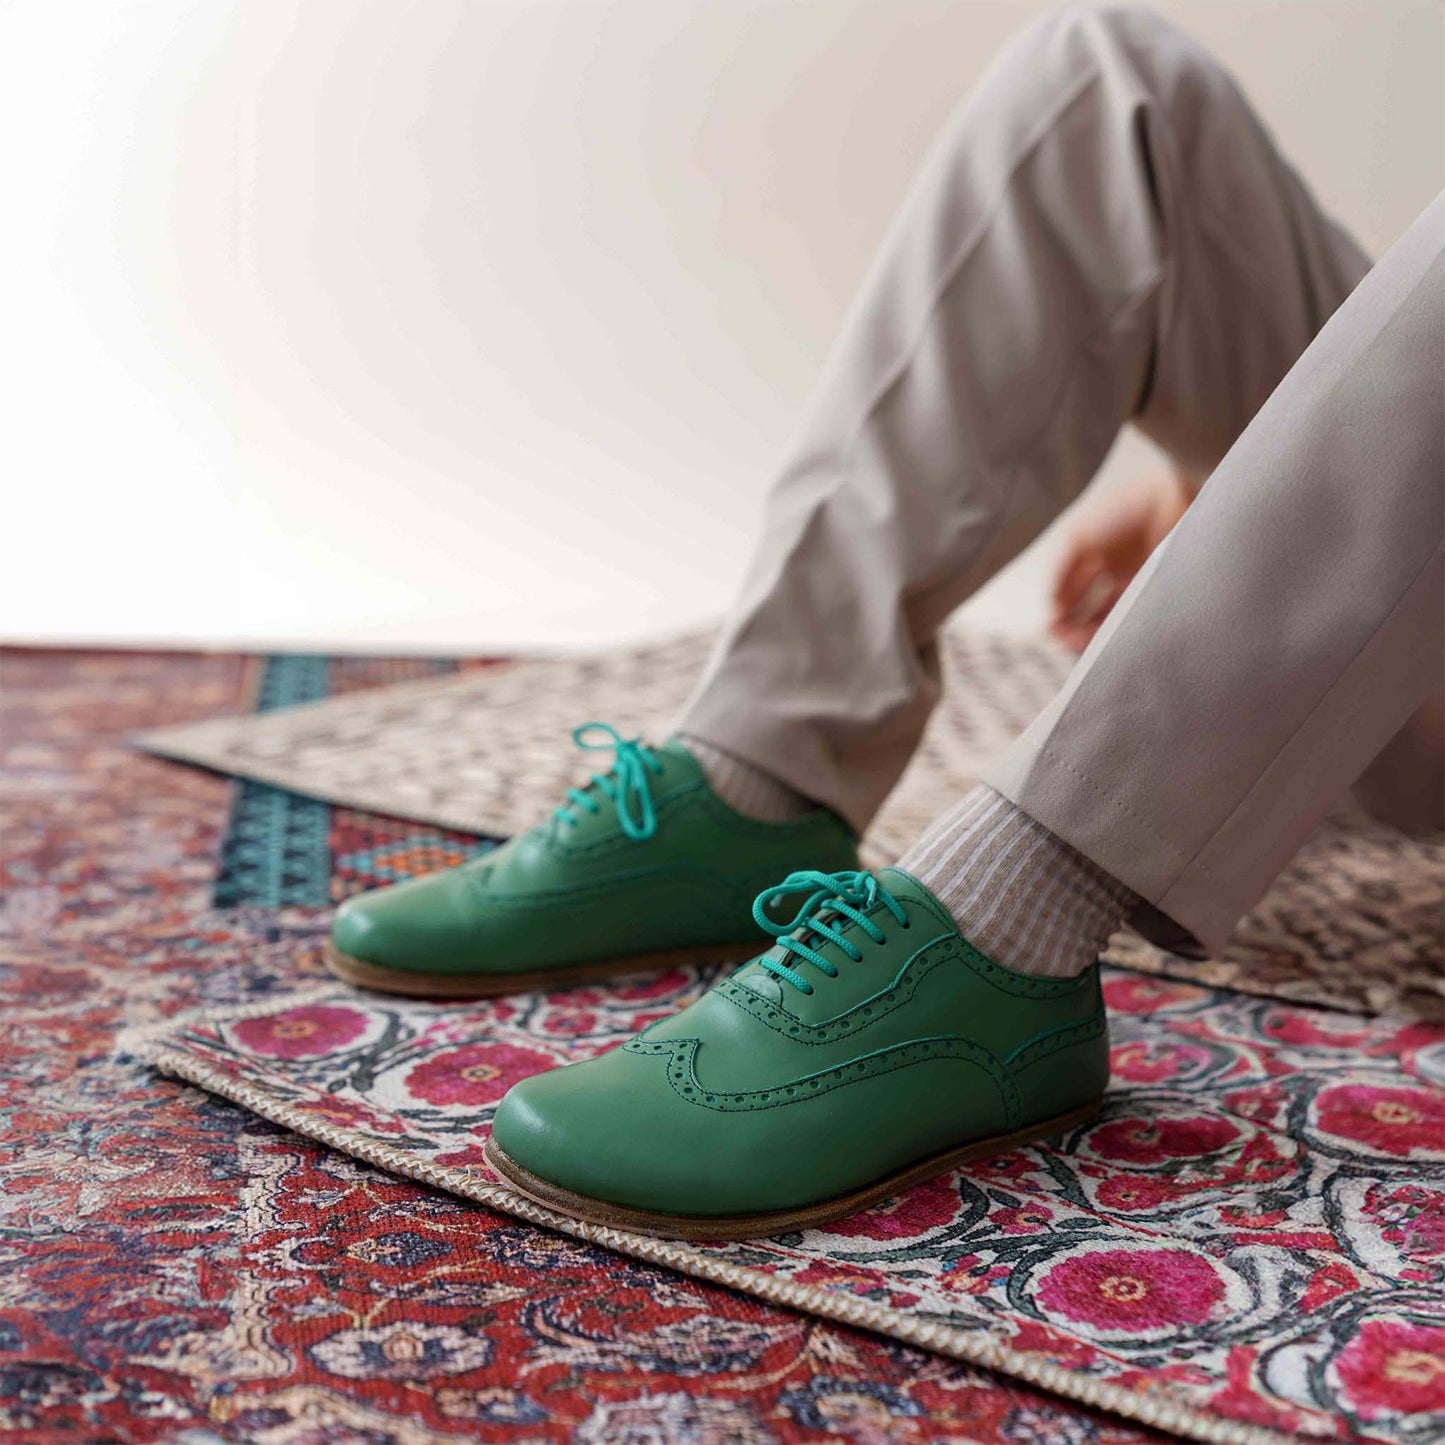 Man wearing green Doris barefoot Oxfords paired with beige pants on a patterned rug – modern look.